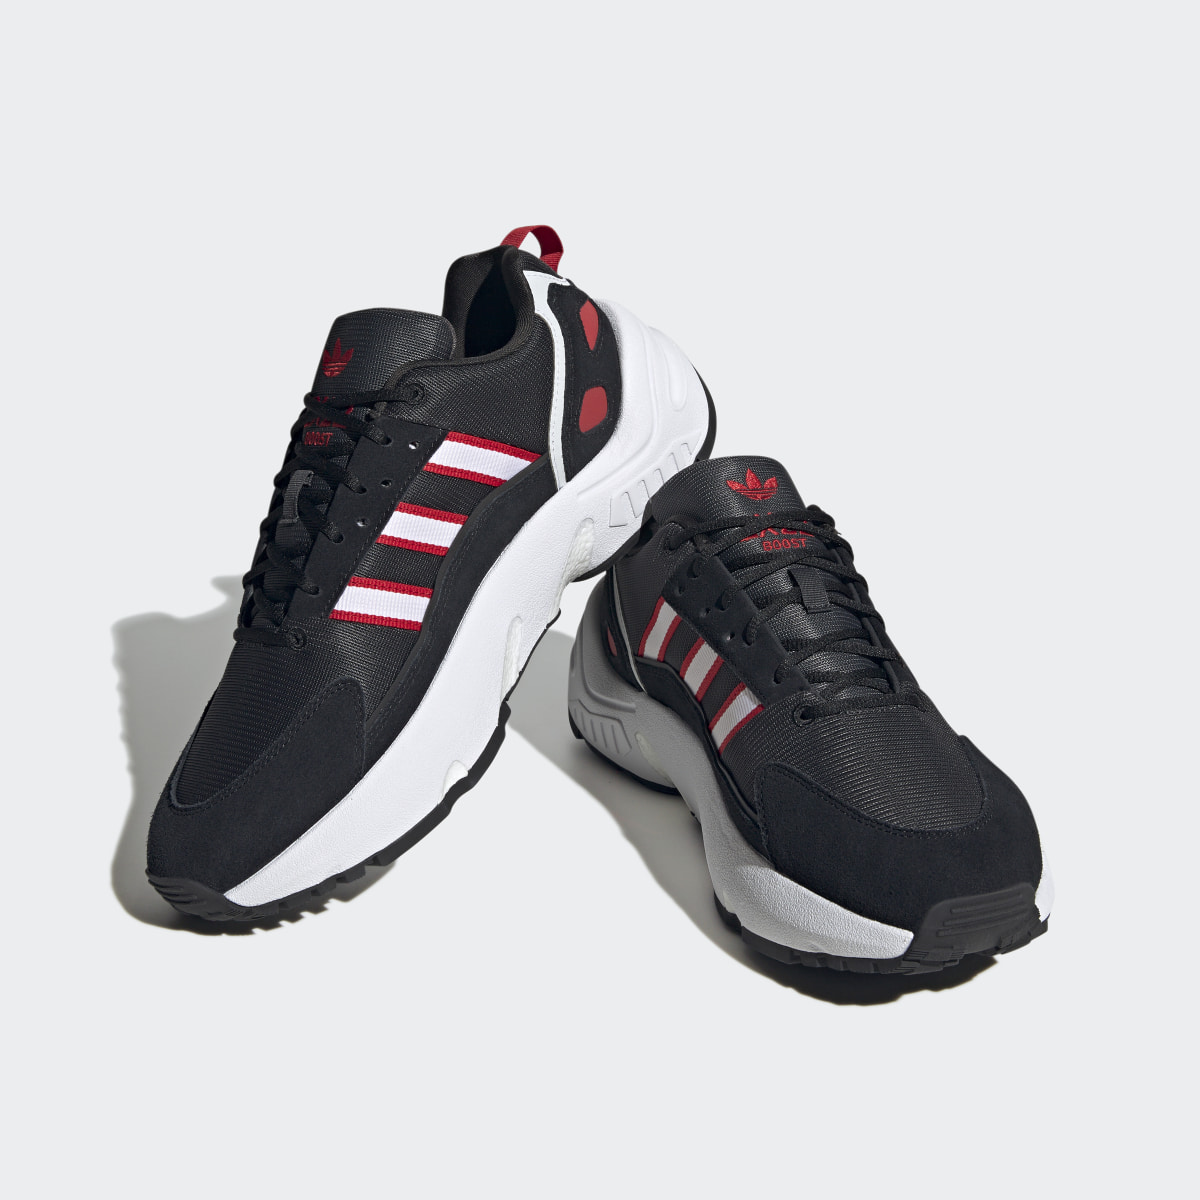 Adidas ZX 22 BOOST Shoes. 5